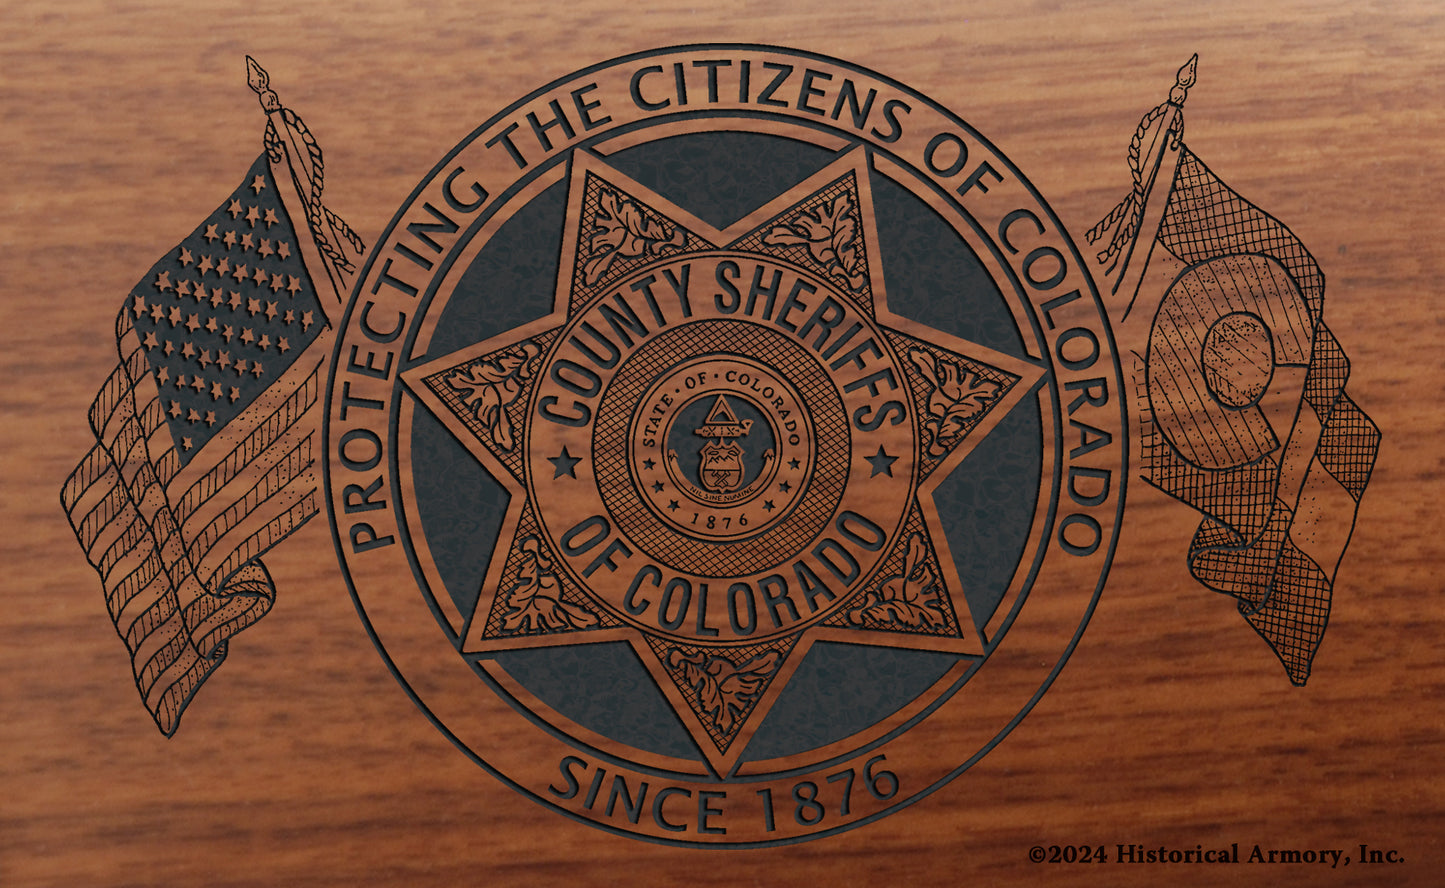 County Sheriffs Of Colorado Association Limited Edition